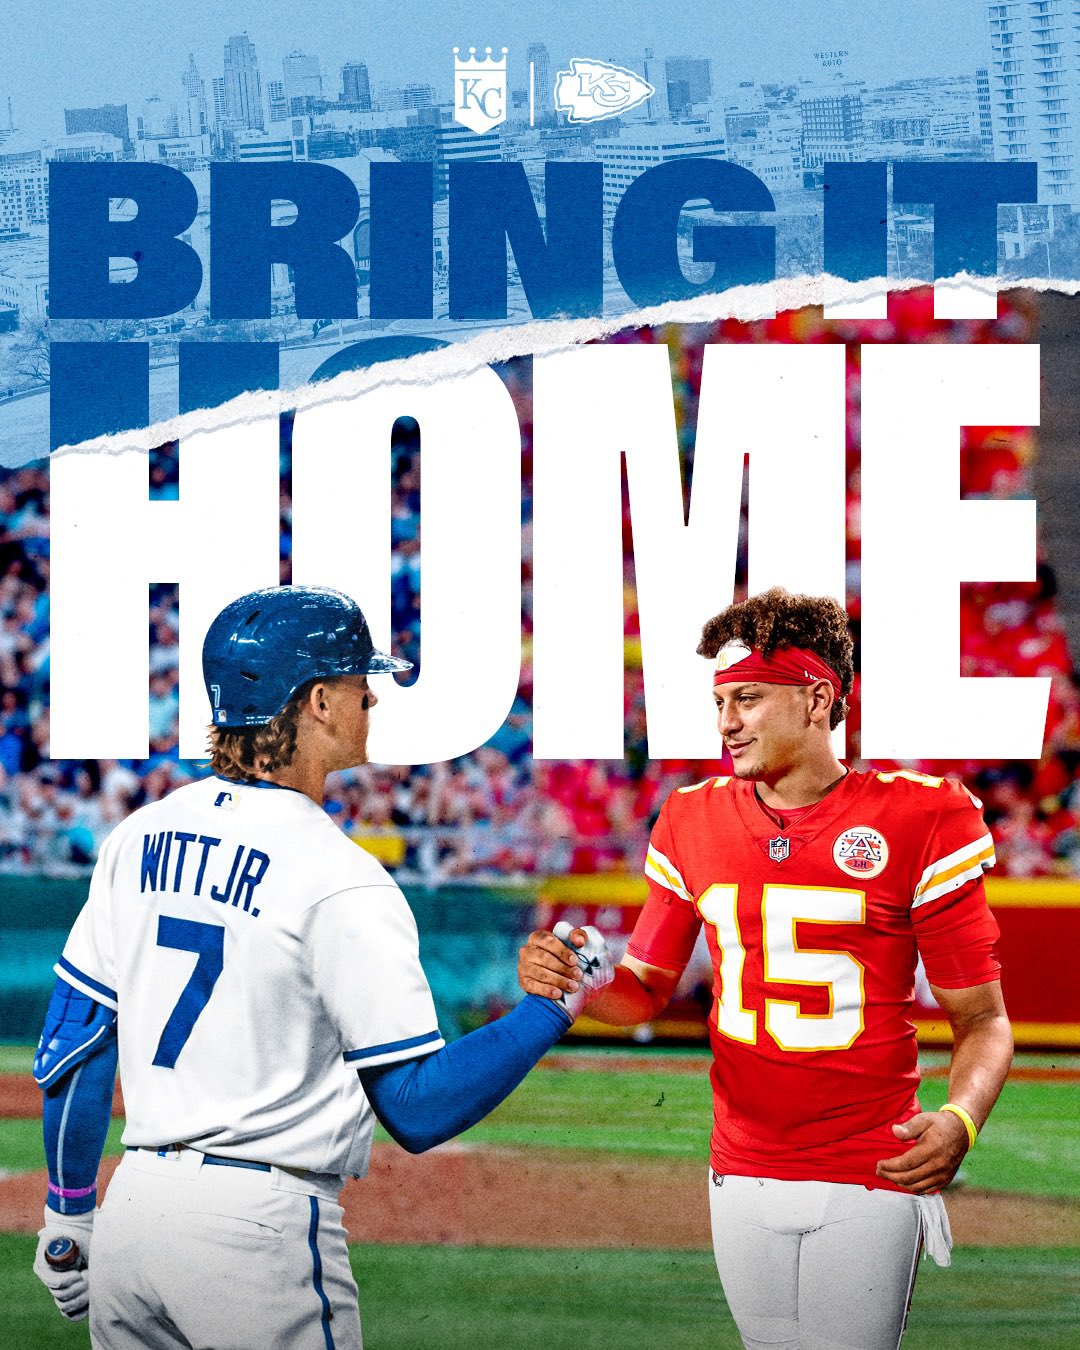 Kansas City Royals on X: Bring the AFC title home, Chiefs! https